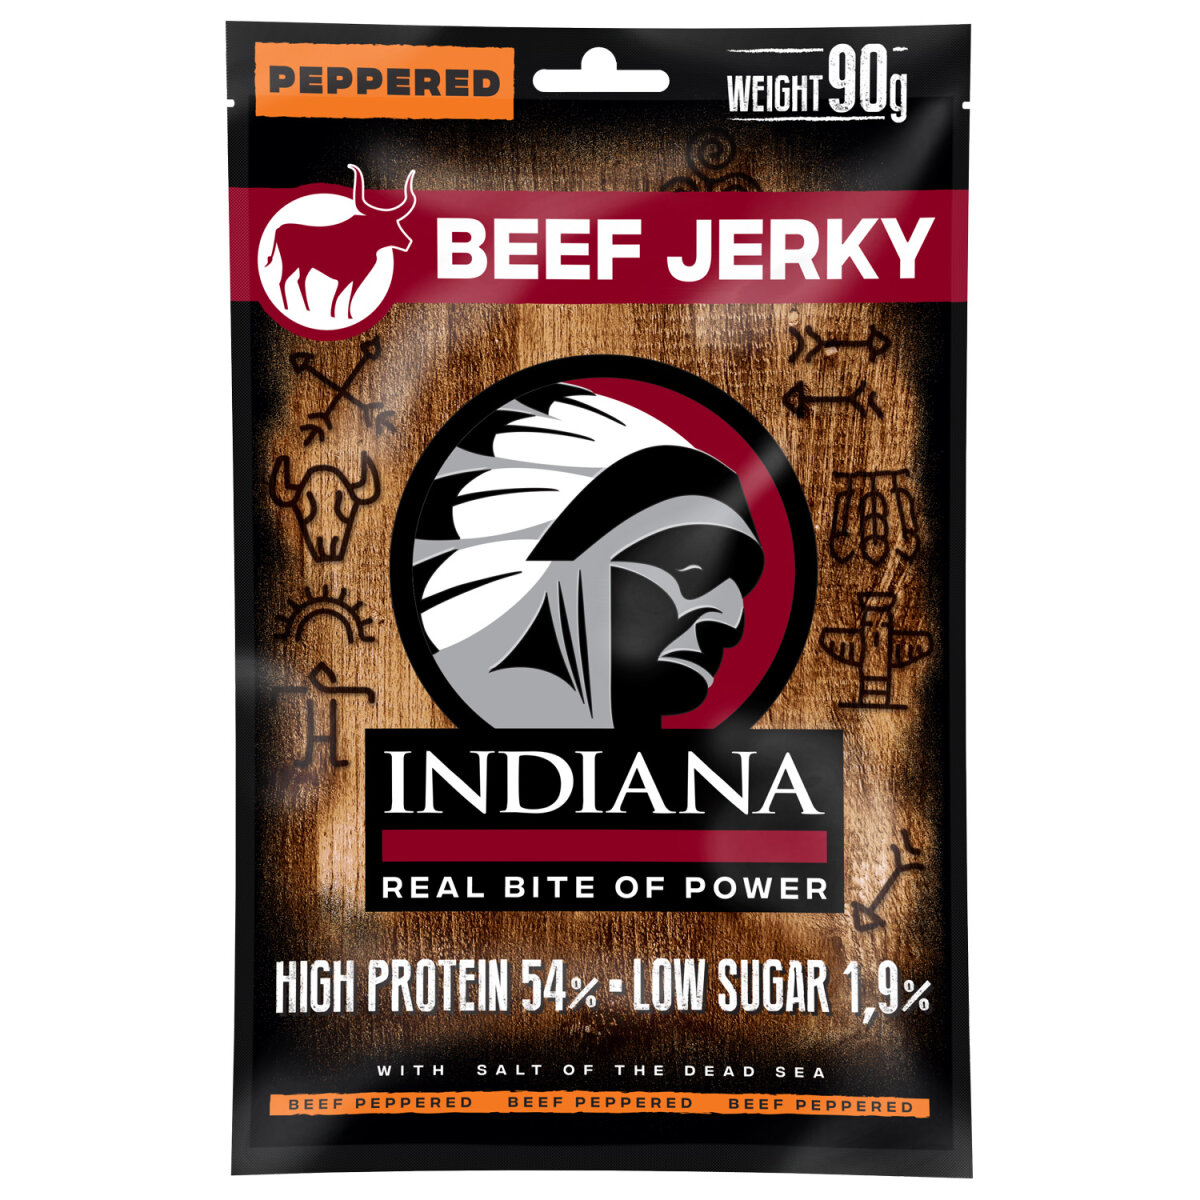 INDIANA Beef Jerky - 25g Einzelpack Peppered